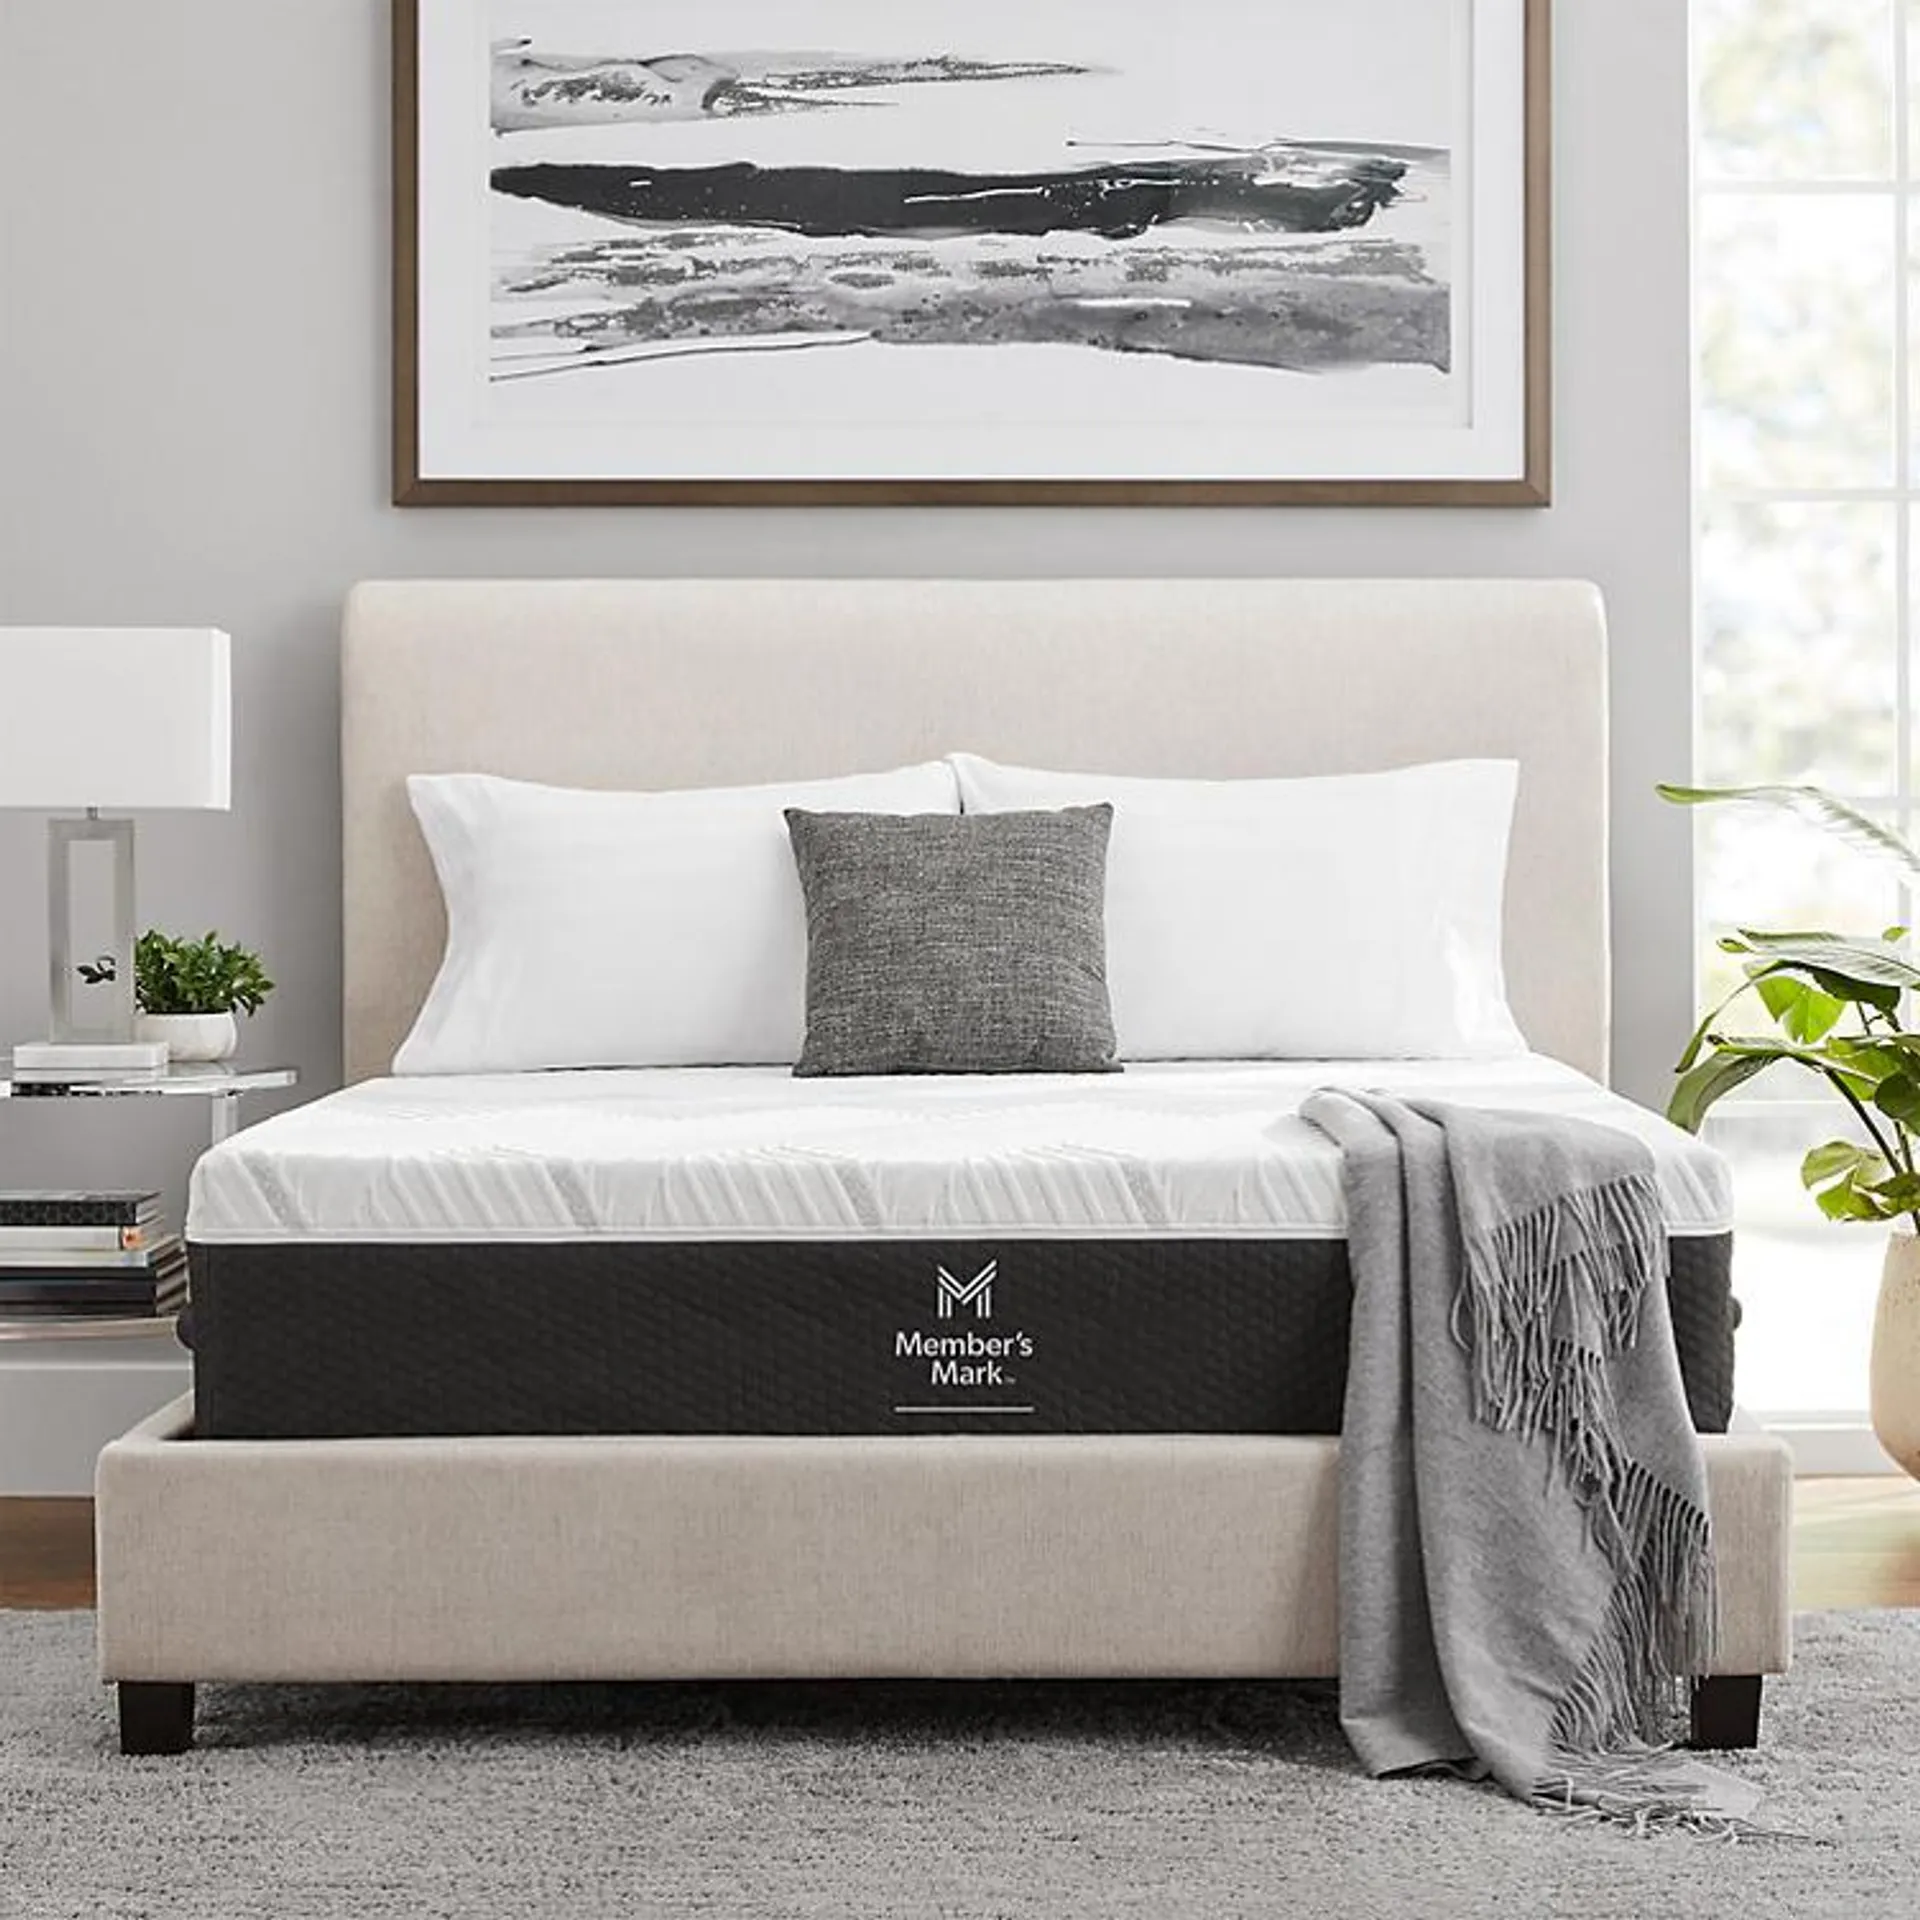 Member’s Mark Hotel Premier Collection 12" Hybrid Mattress, Available in Twin, Full, Queen, King, California King